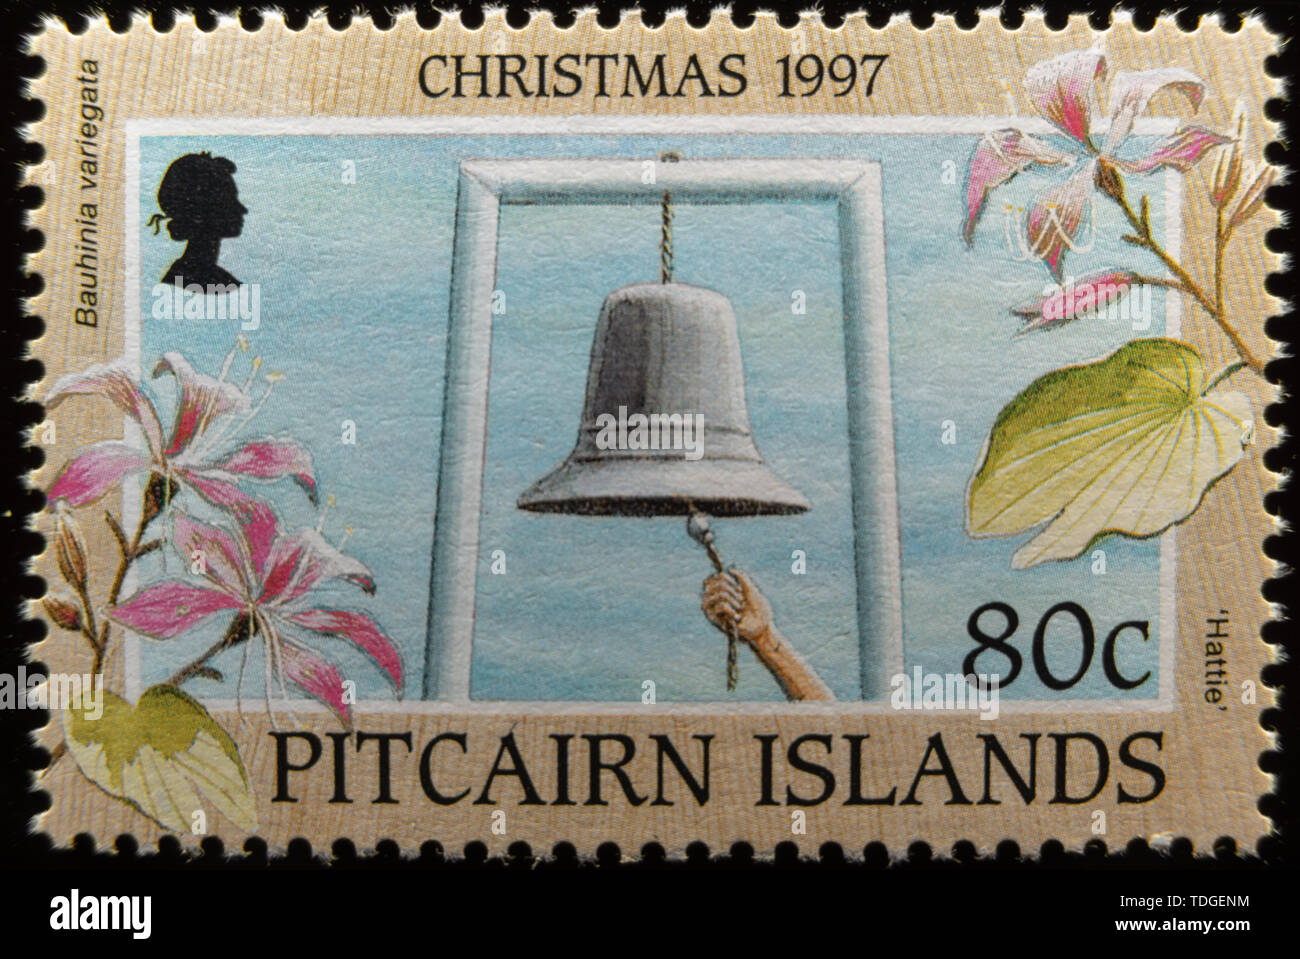 A macro image of a commemorative Pitcairn Islands 80c Christmas 1997 postage stamp. Stock Photo